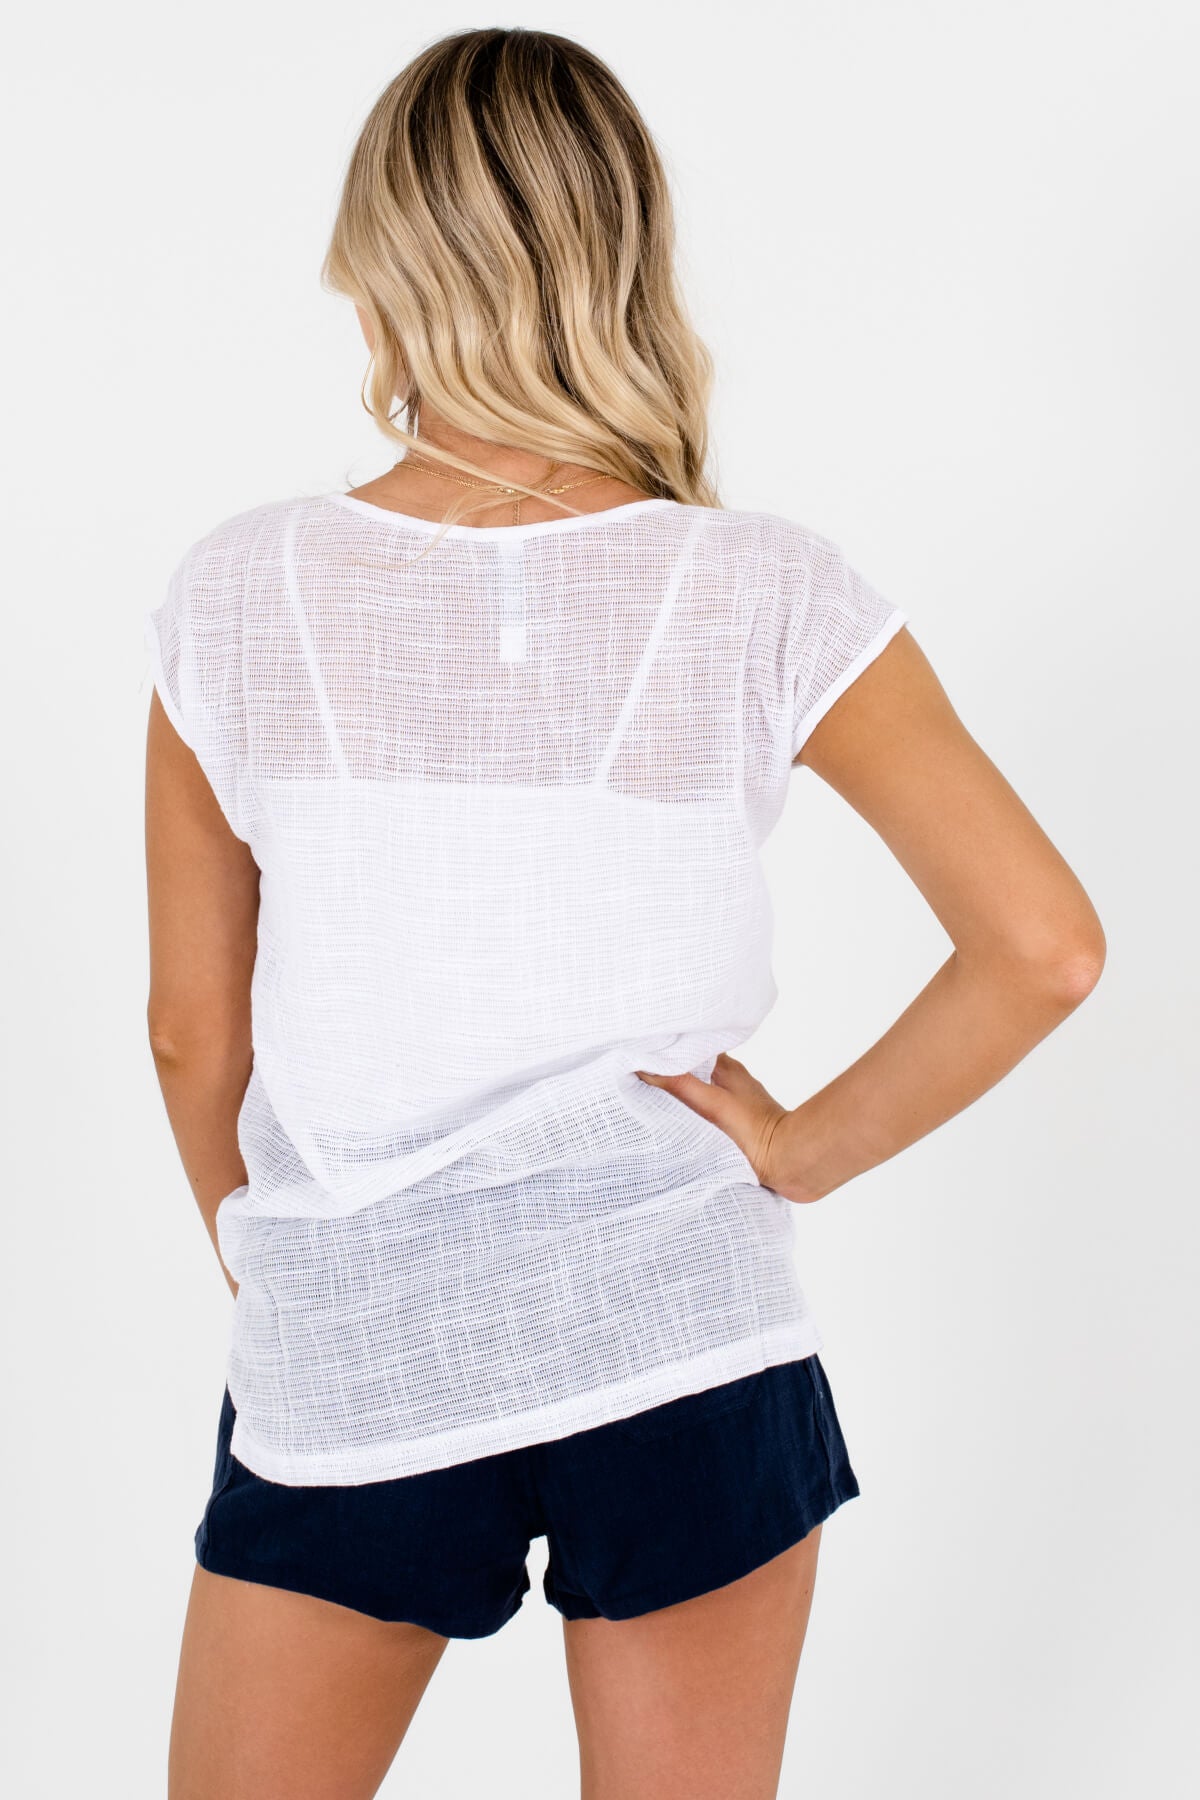 Women's White High-Quality Boutique Tops